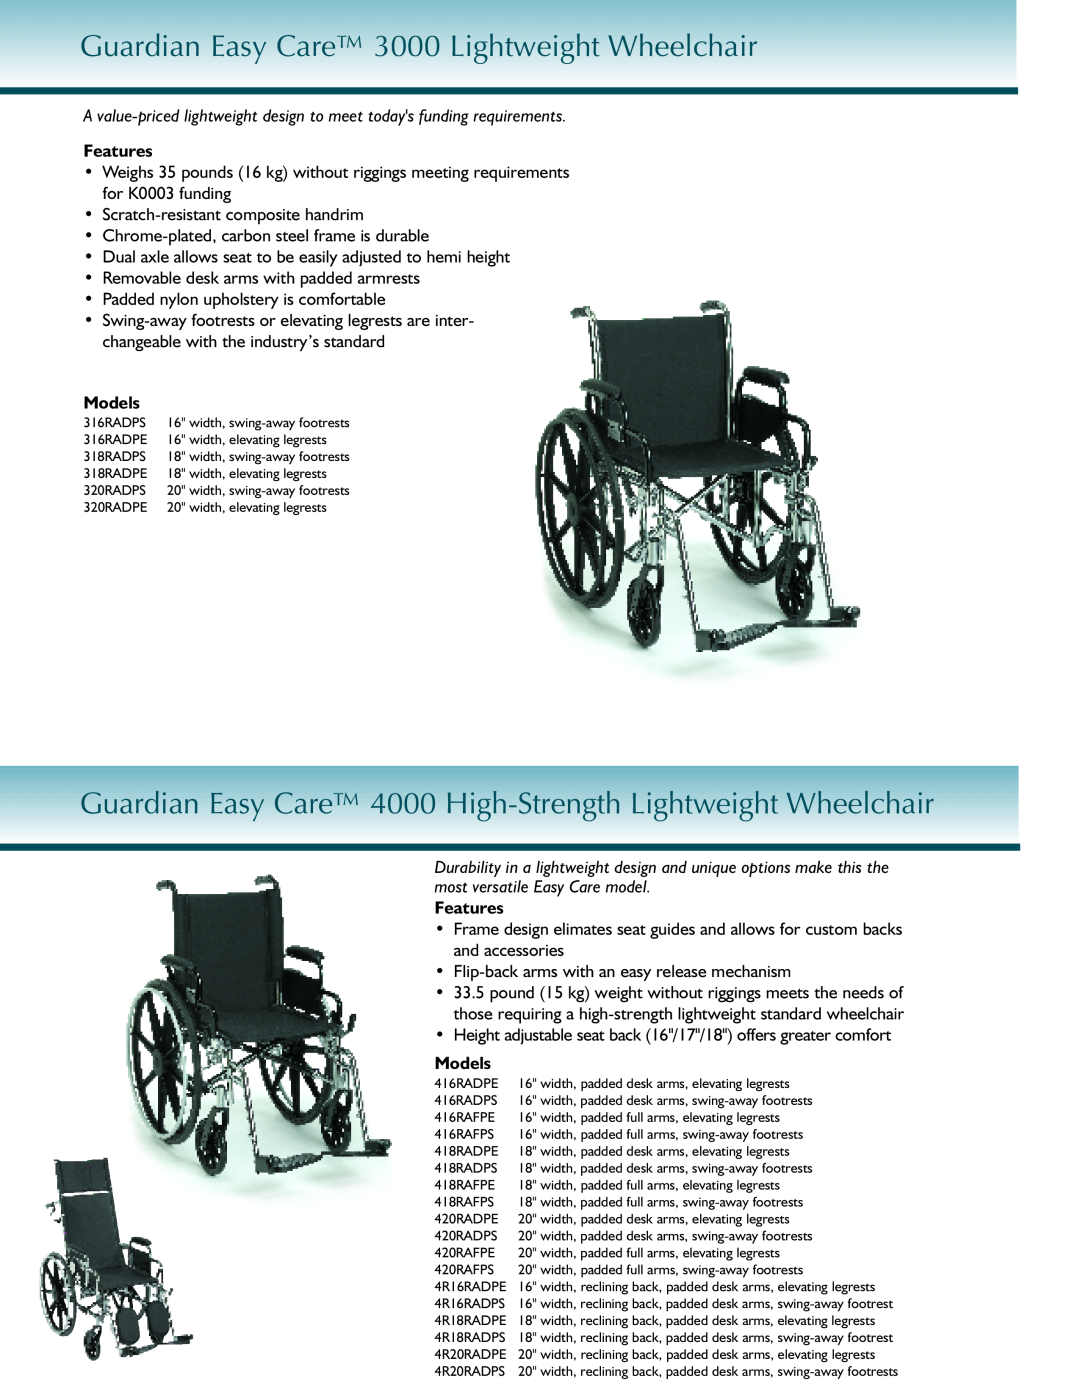 Sunrise Medical Wheelerchair manual Guardian Easy Care 3000 Lightweight Wheelchair, Features, Models 